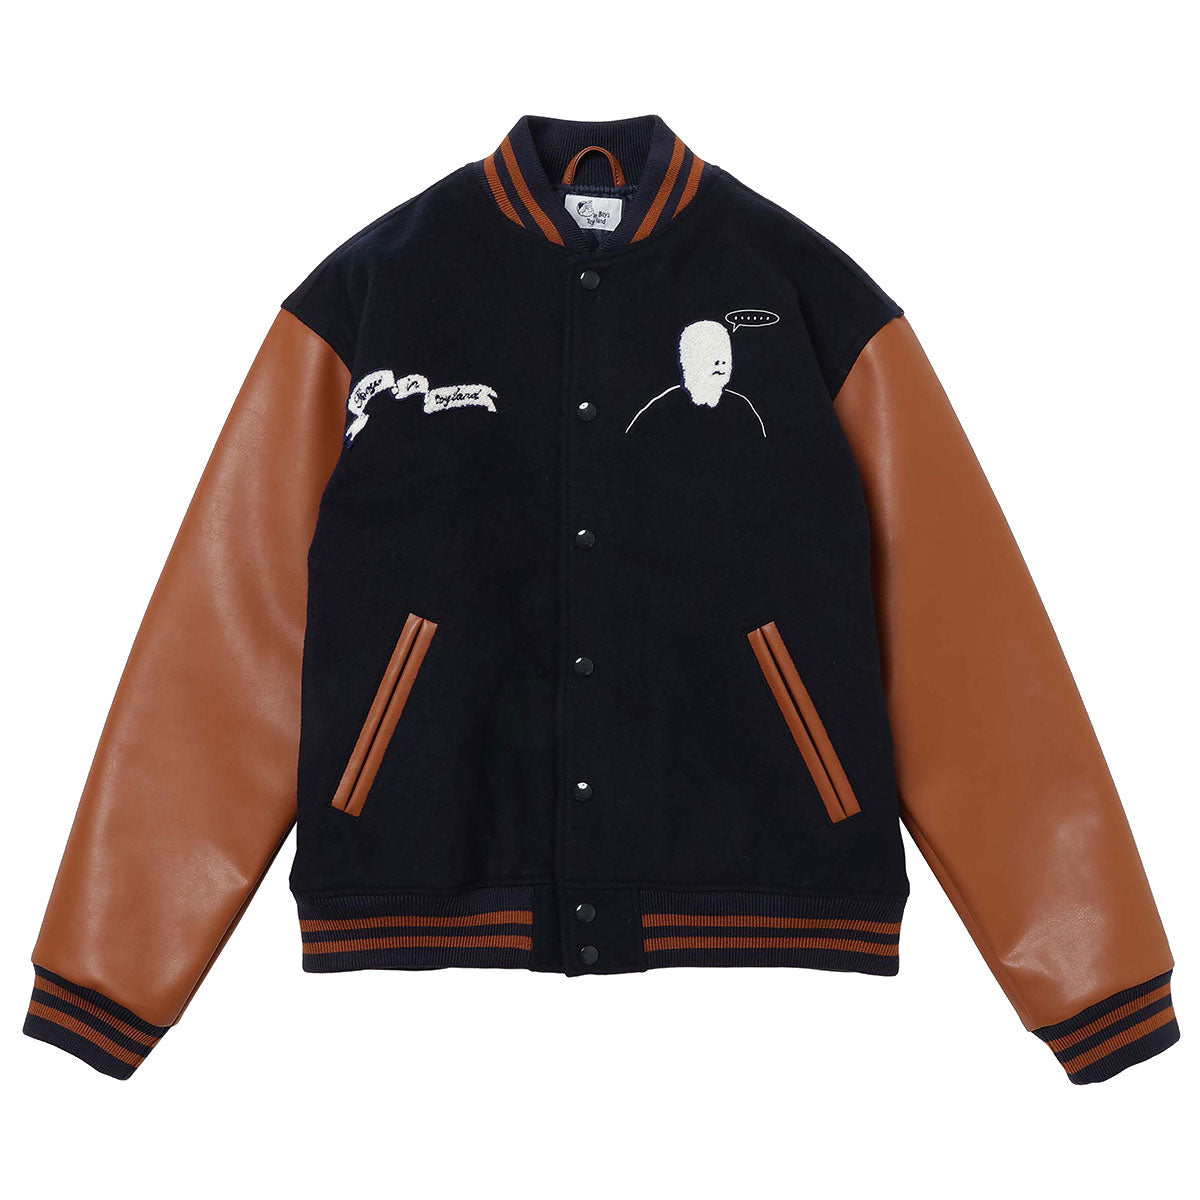 T-LAND VARSITY JACKET – Why are you here?